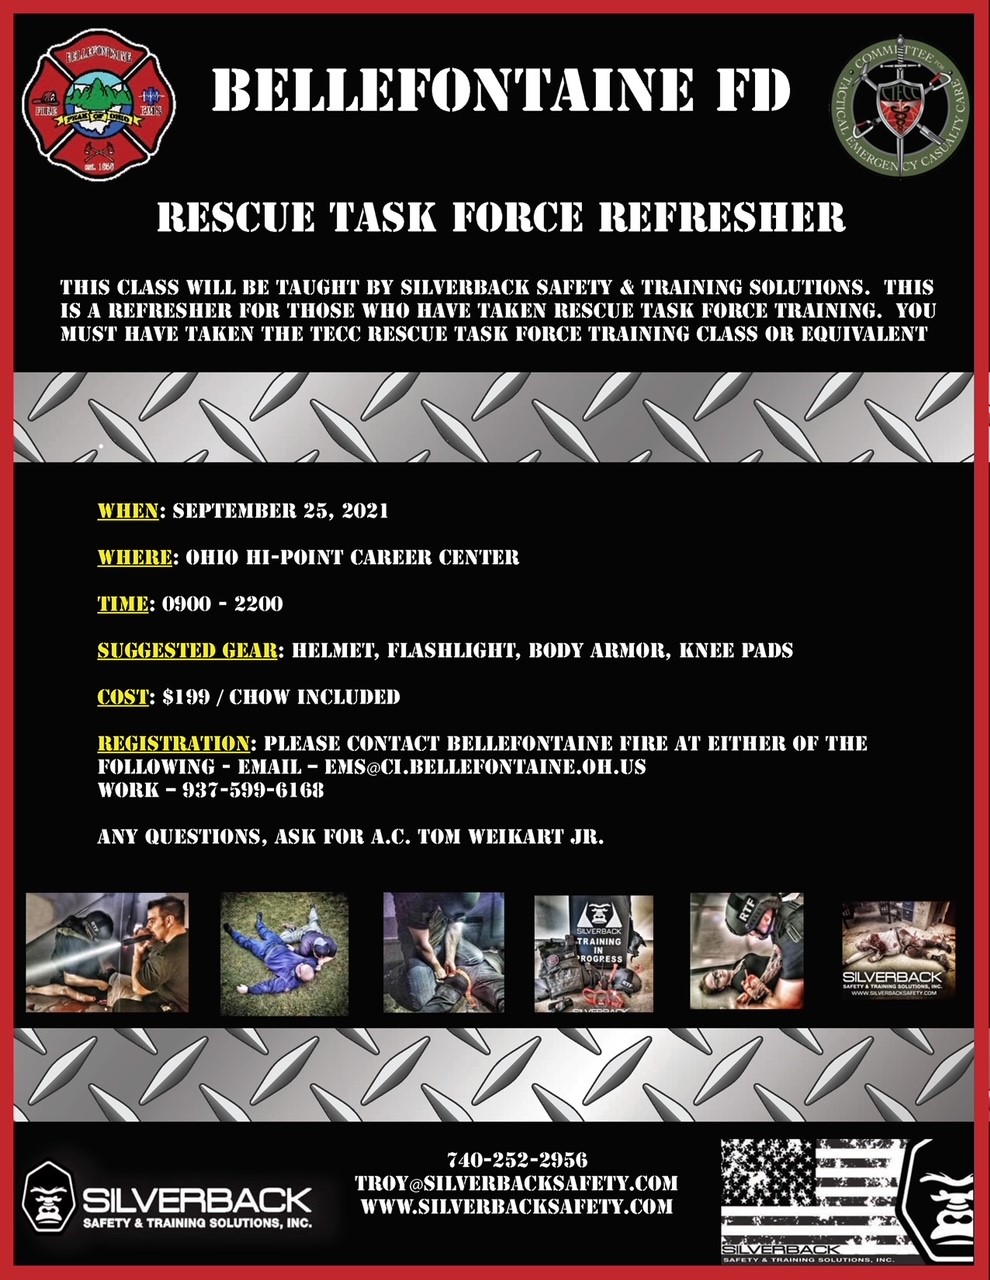 Bellefontaine FD Rescue Task Force Refresher